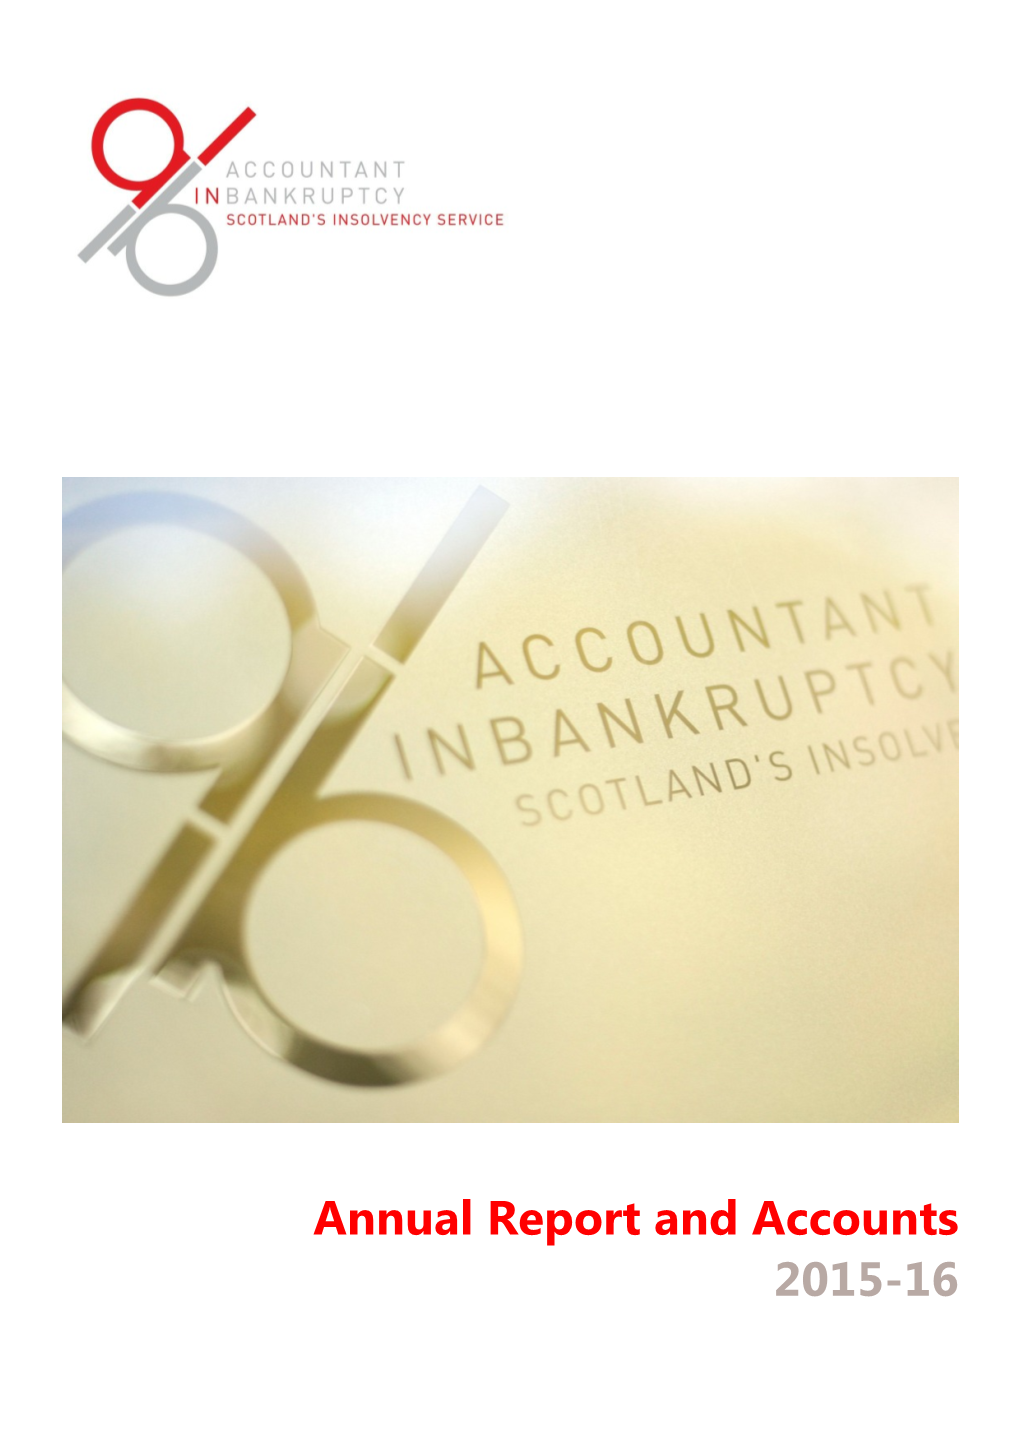 Accountant in Bankruptcy (Aib) Annual Report and Accounts 2015-16